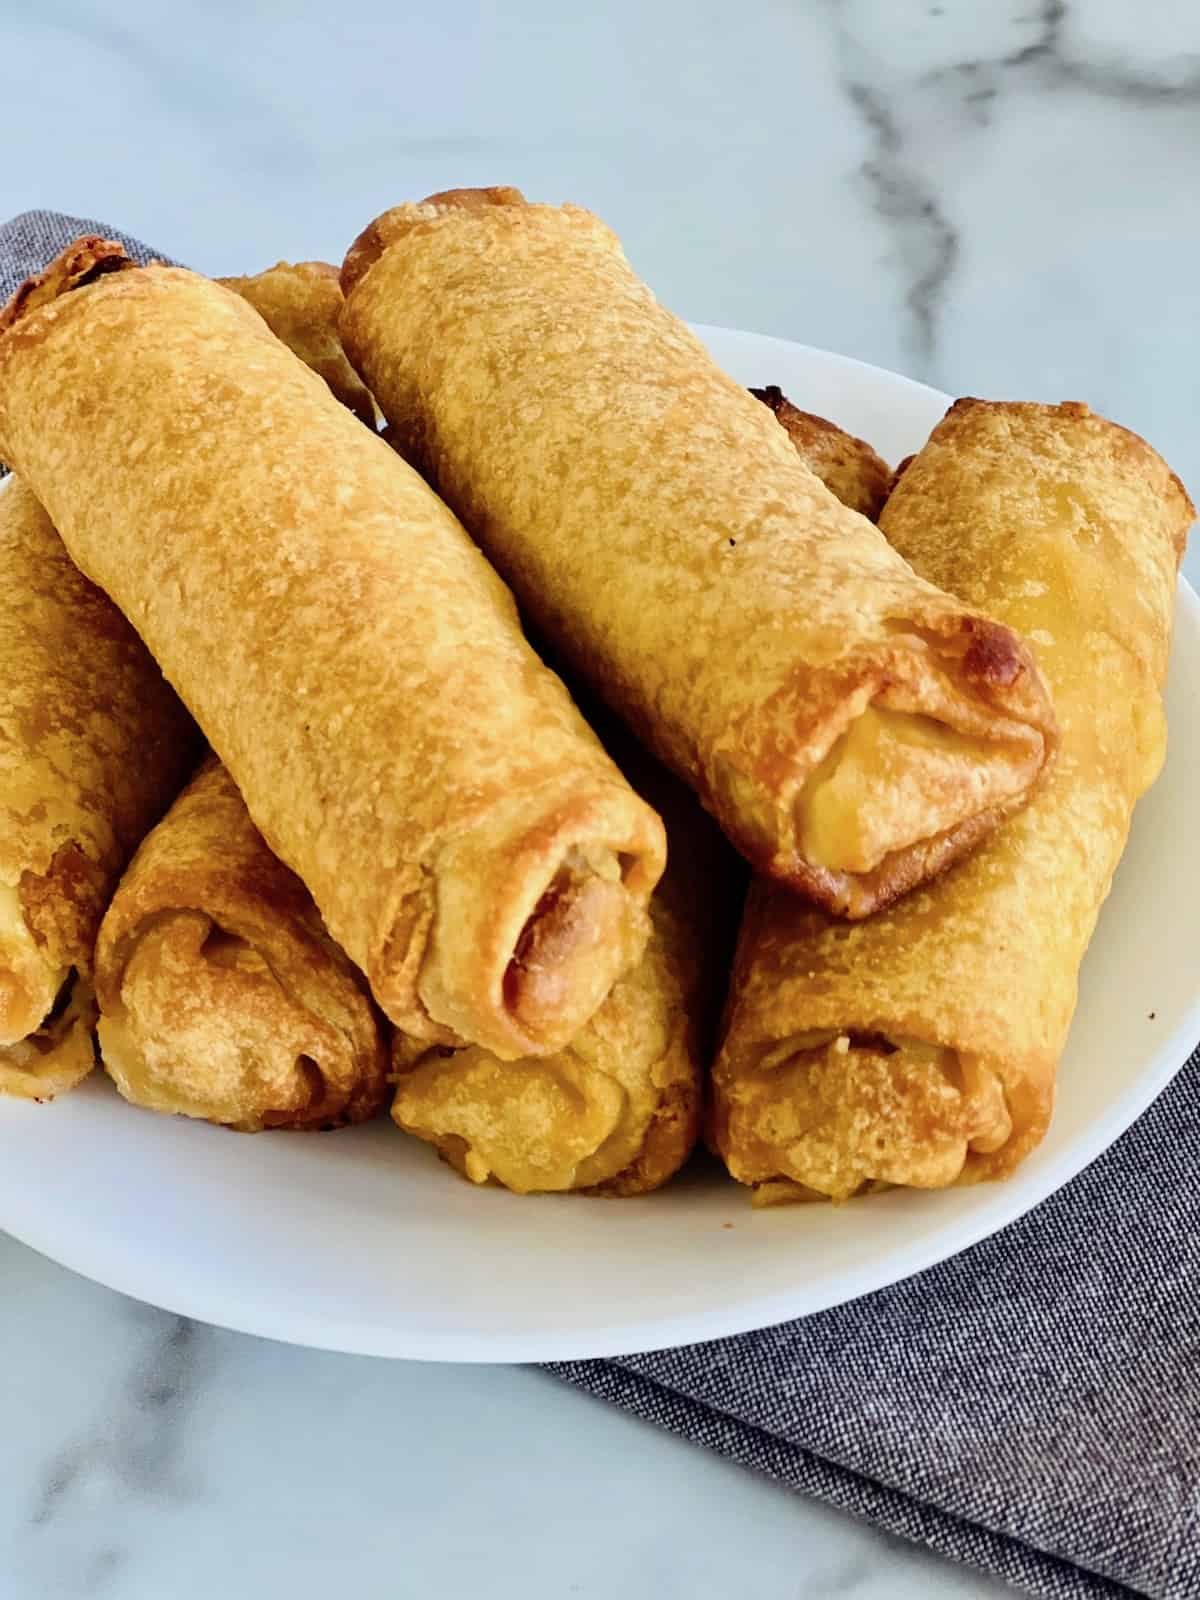 Egg Rolls Hot from the air fryer and stacked on a plate.